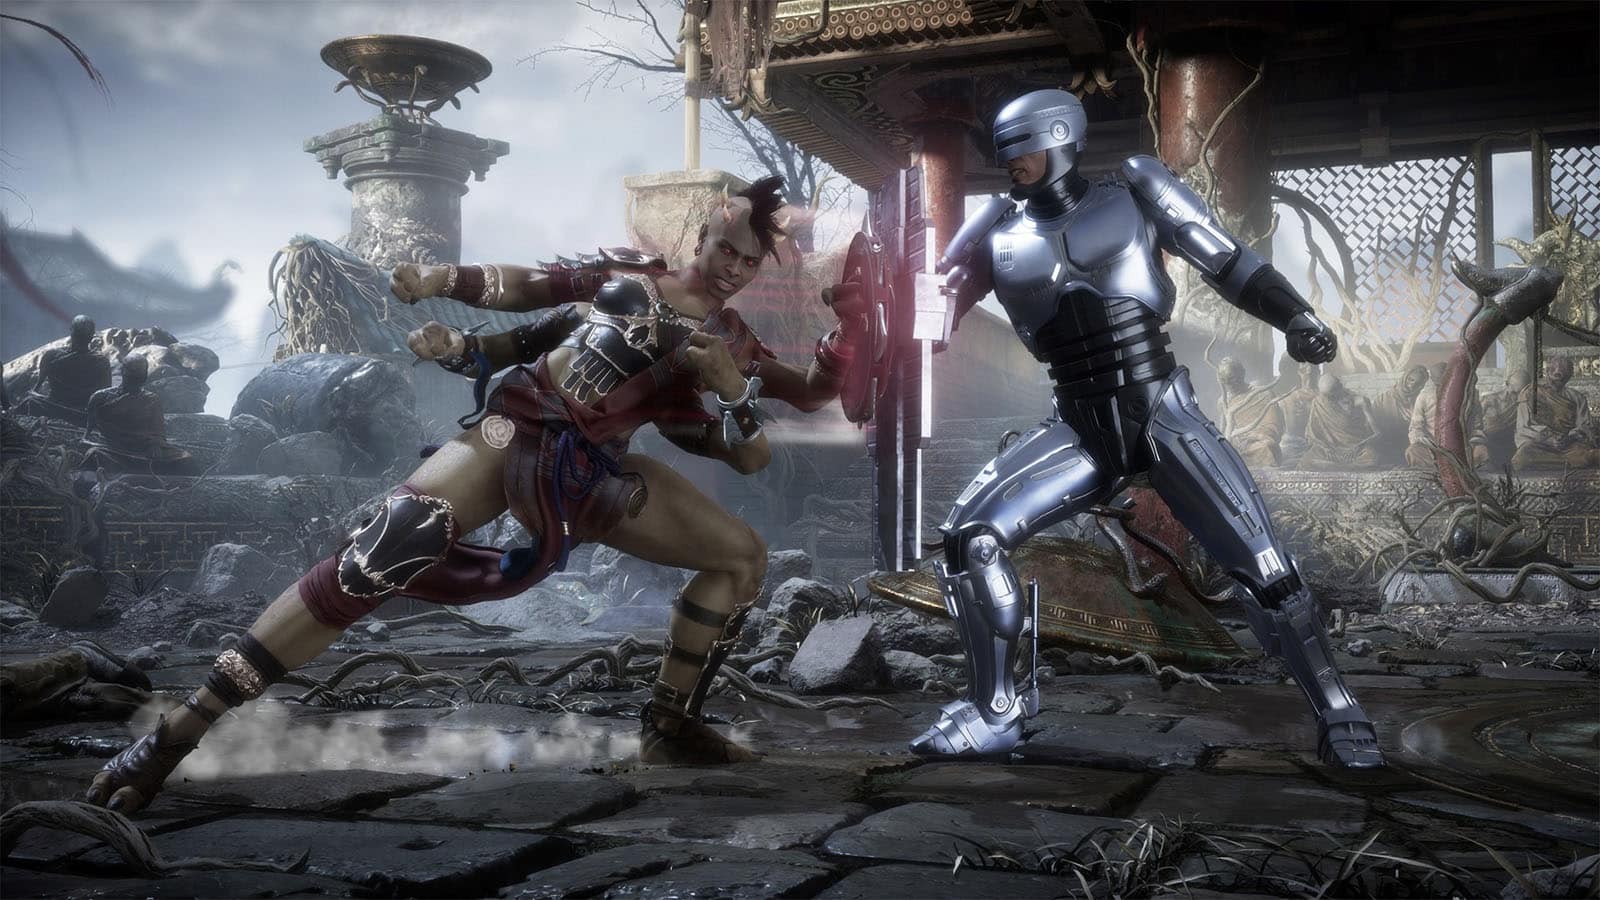 How to unlock characters in Mortal Kombat 11: Add DLC fighters to your  roster - Dexerto